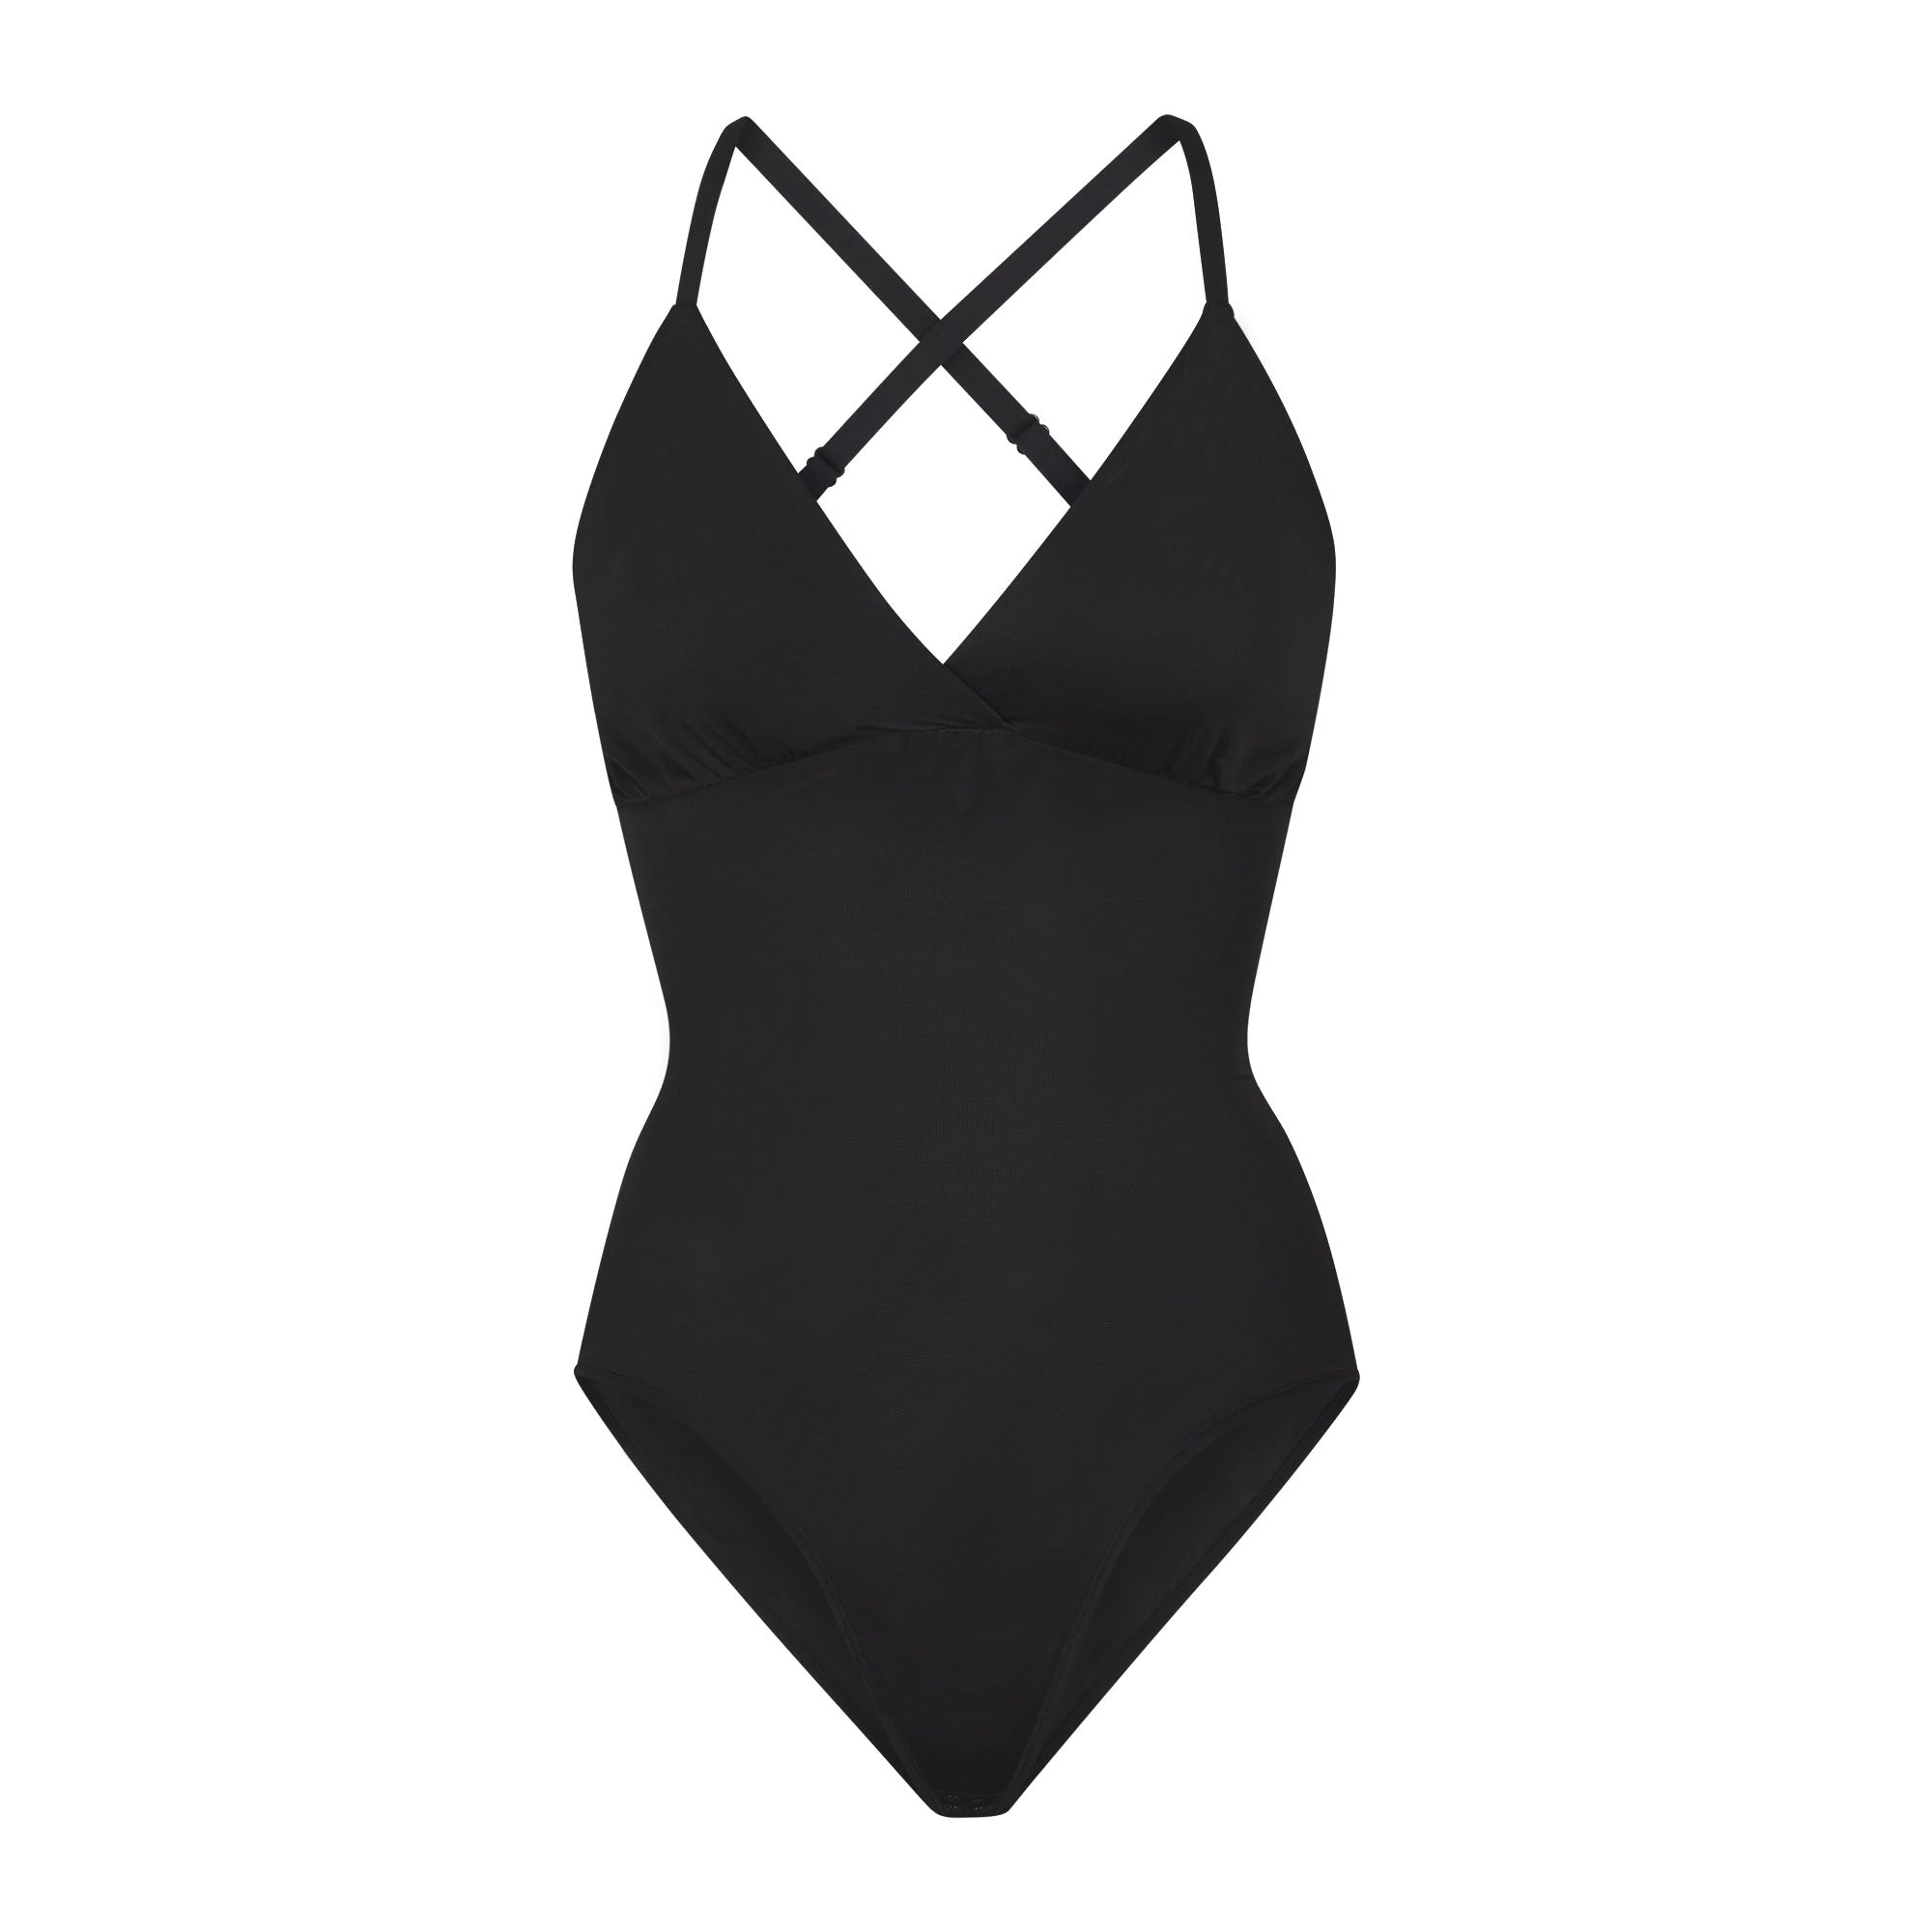 Barely There Bodysuit Brief W Snaps Onyx